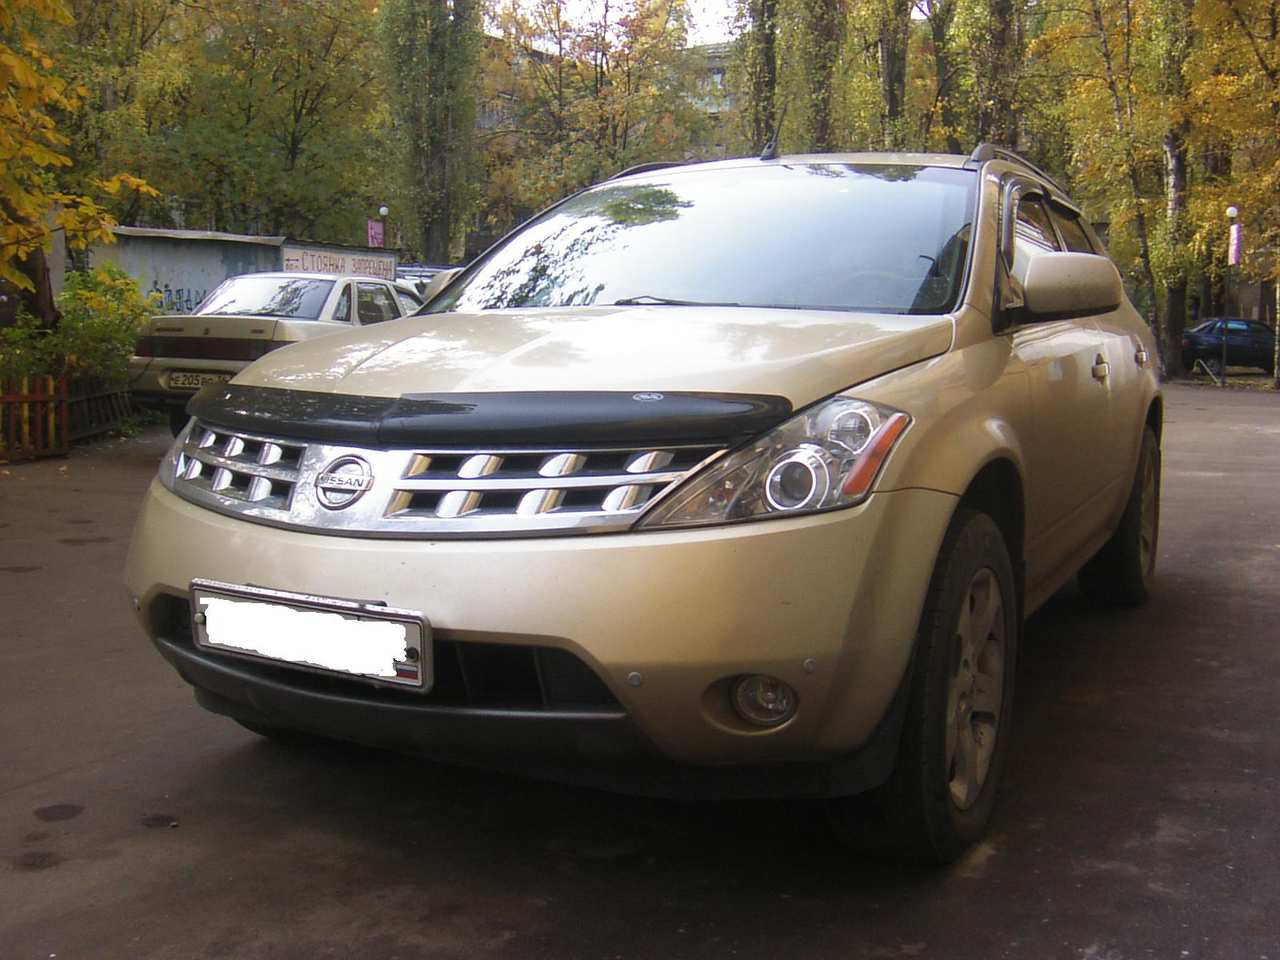 Used nissan murano 2002 for sale #6